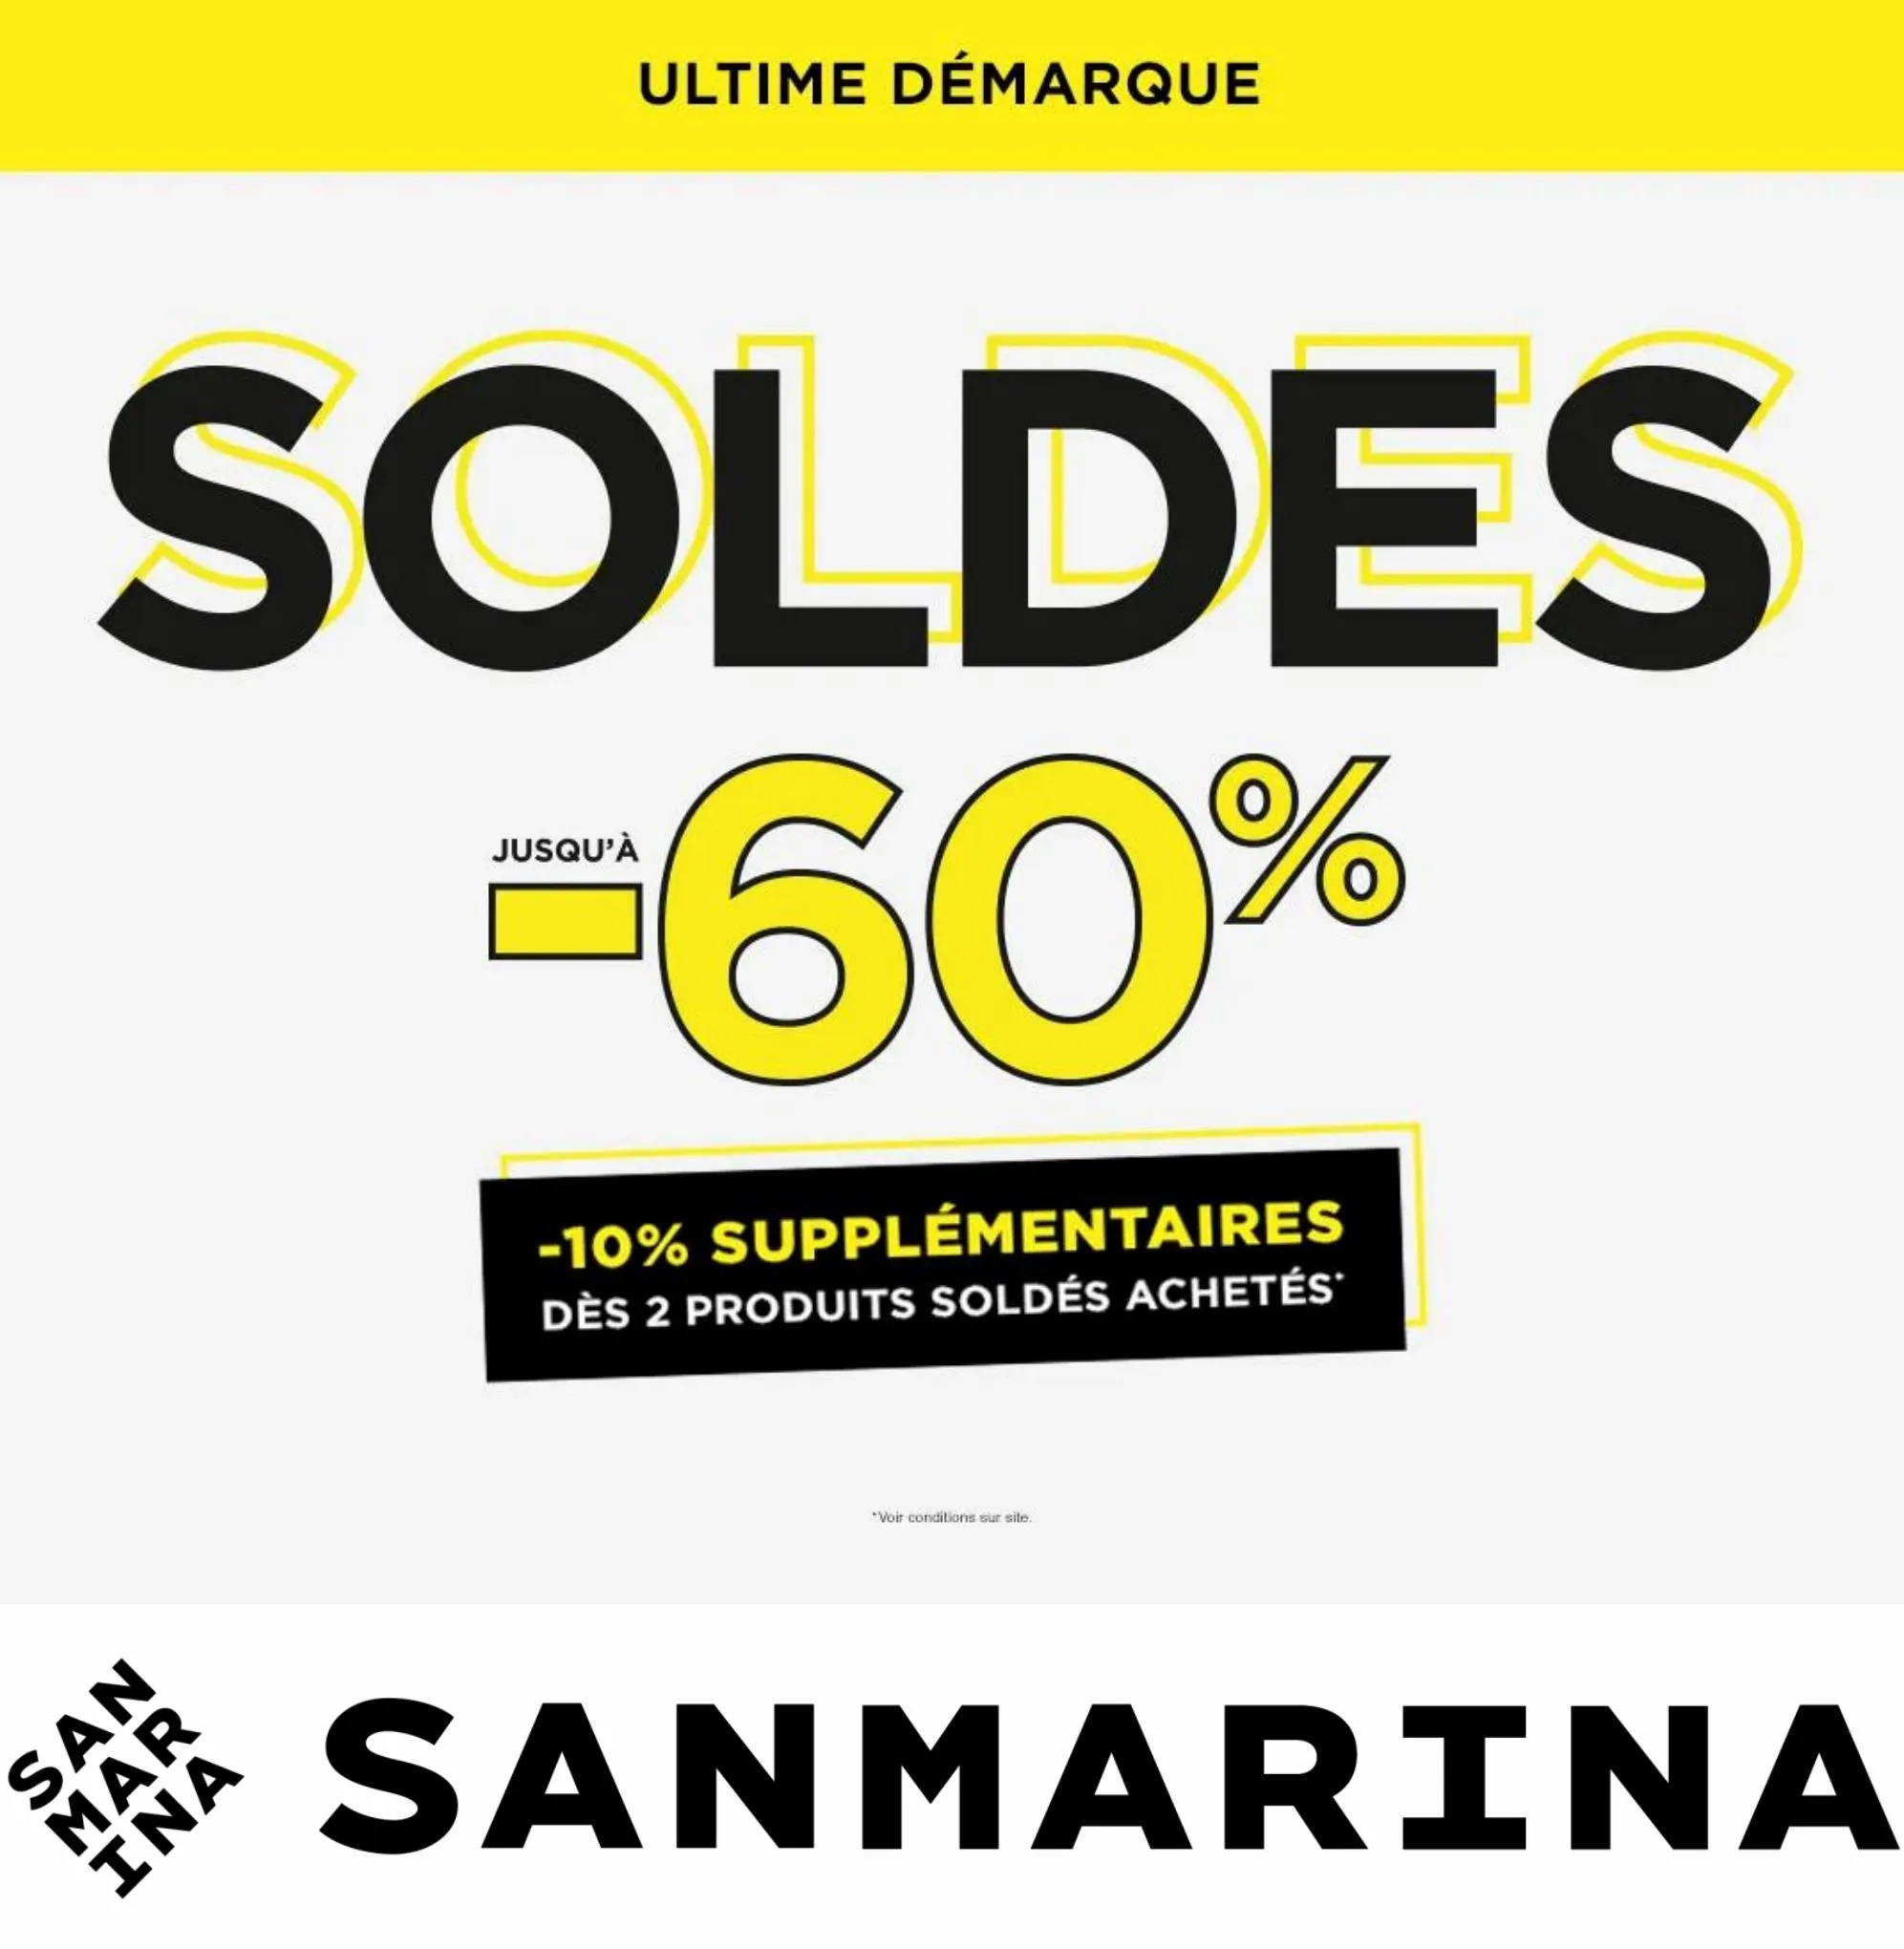 Catalogue SOLDES -60% HOMME, page 00001